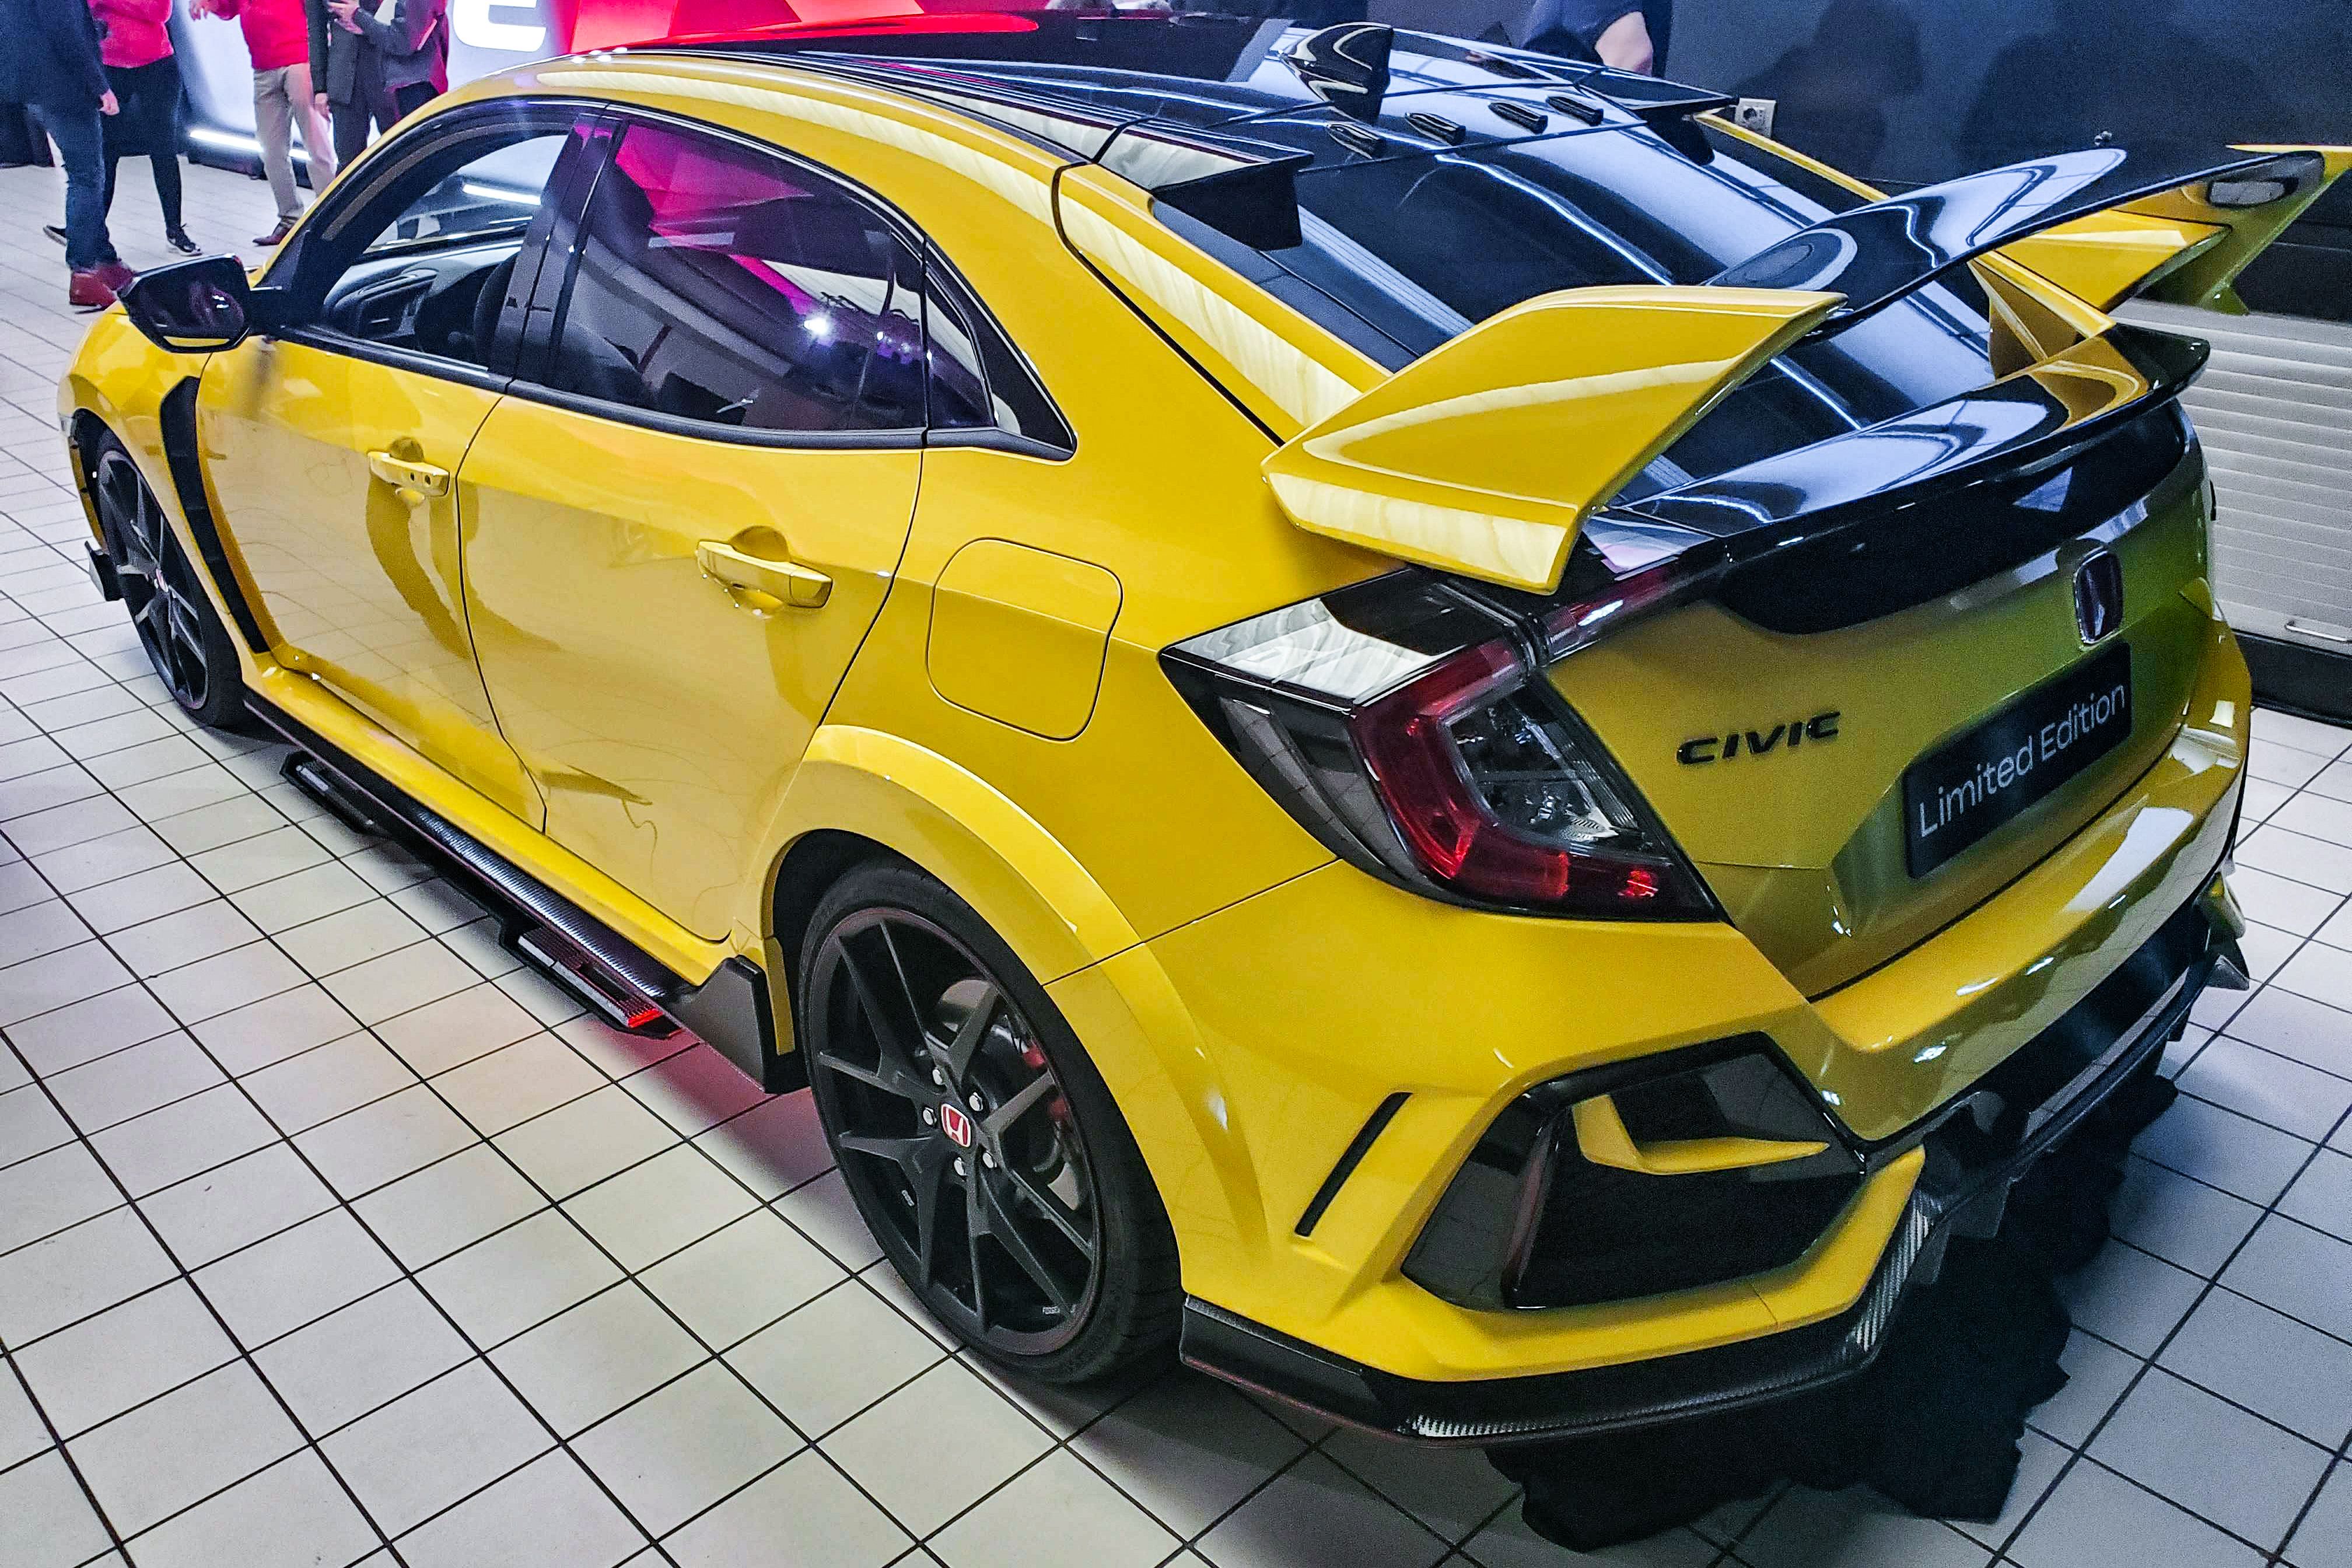 For 2021, Honda Civic Type R Adds a Race-Focused Limited Edition